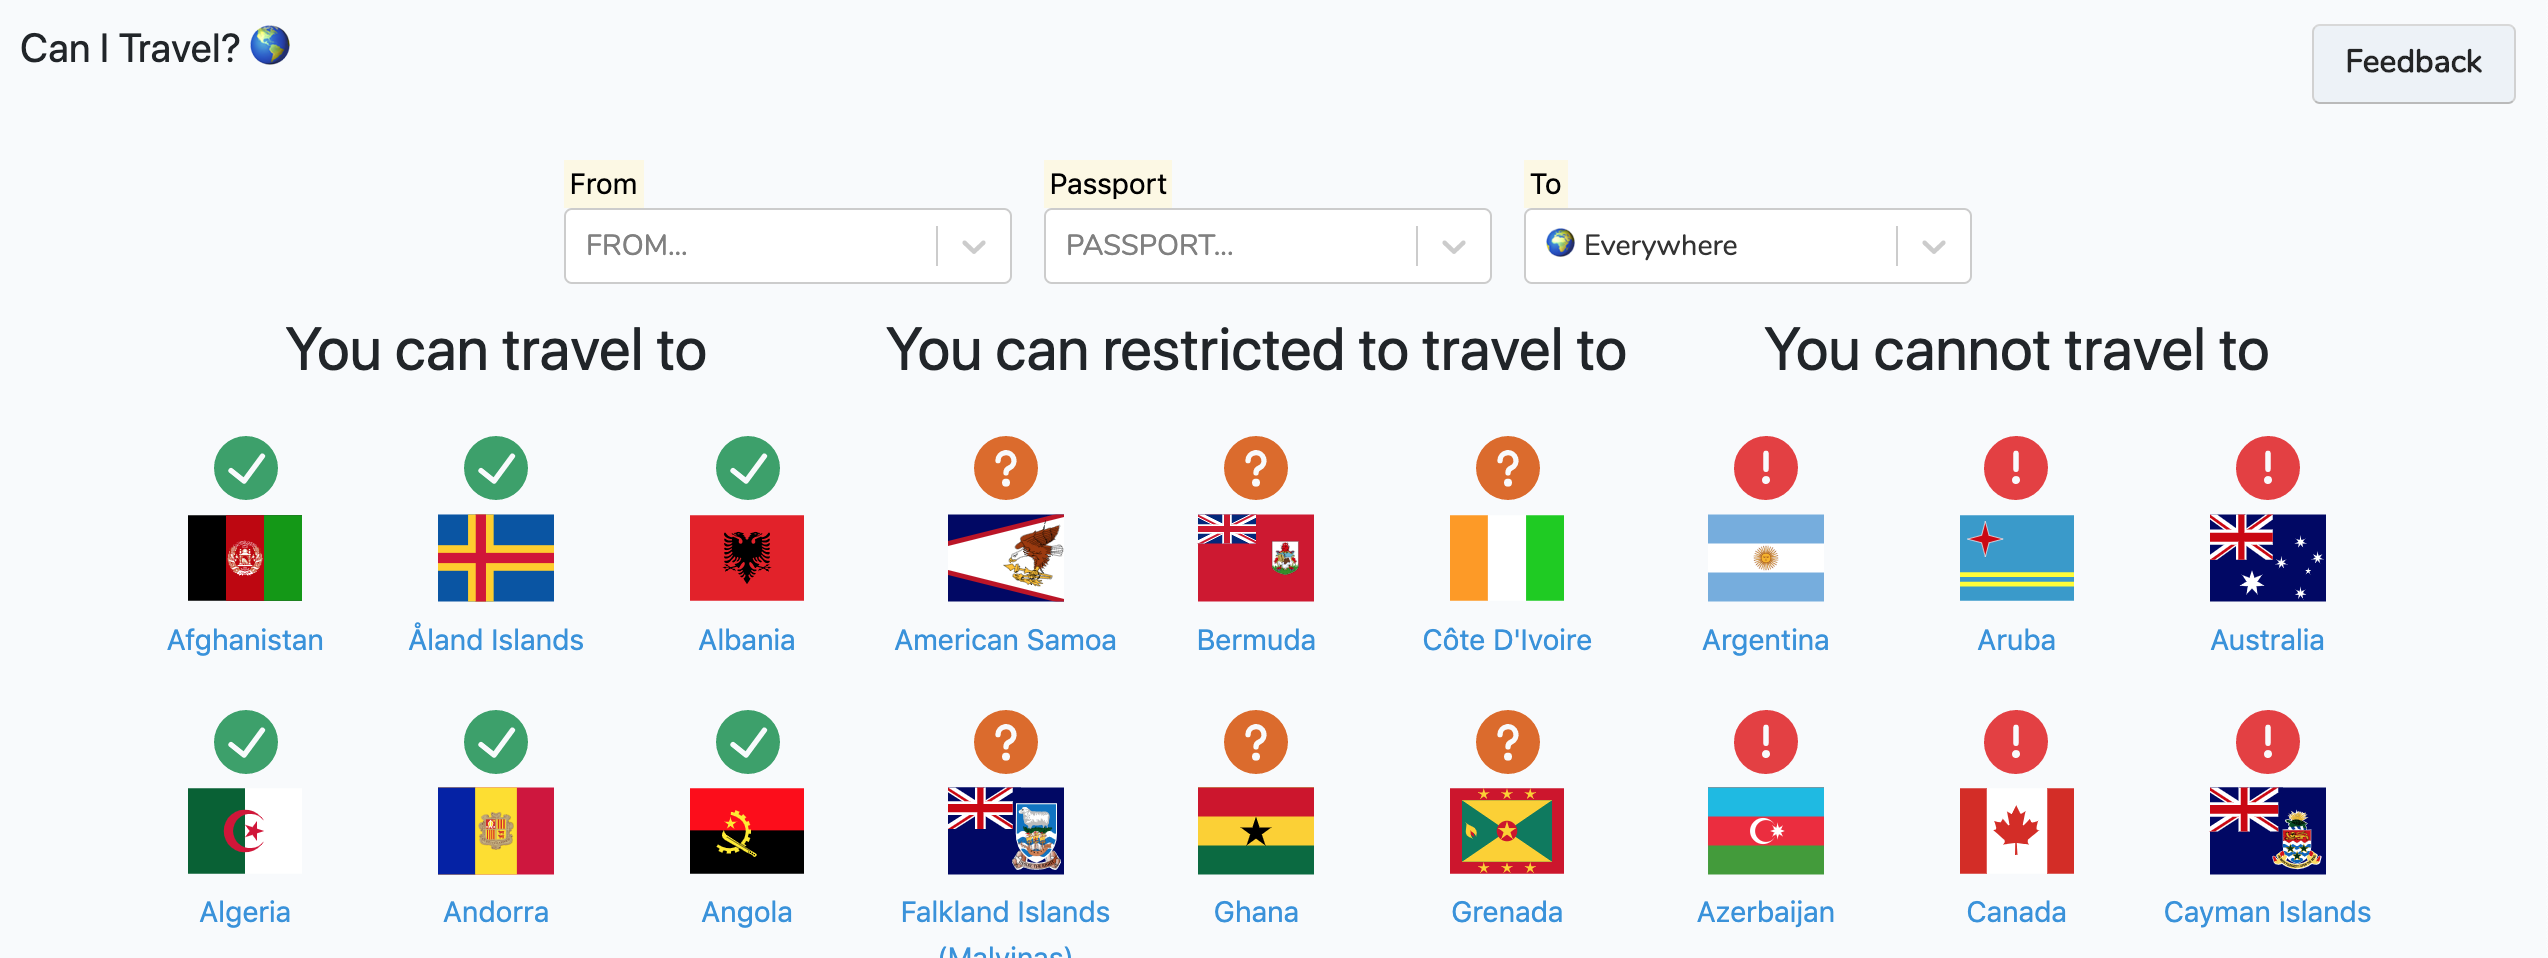 First version of canitravel